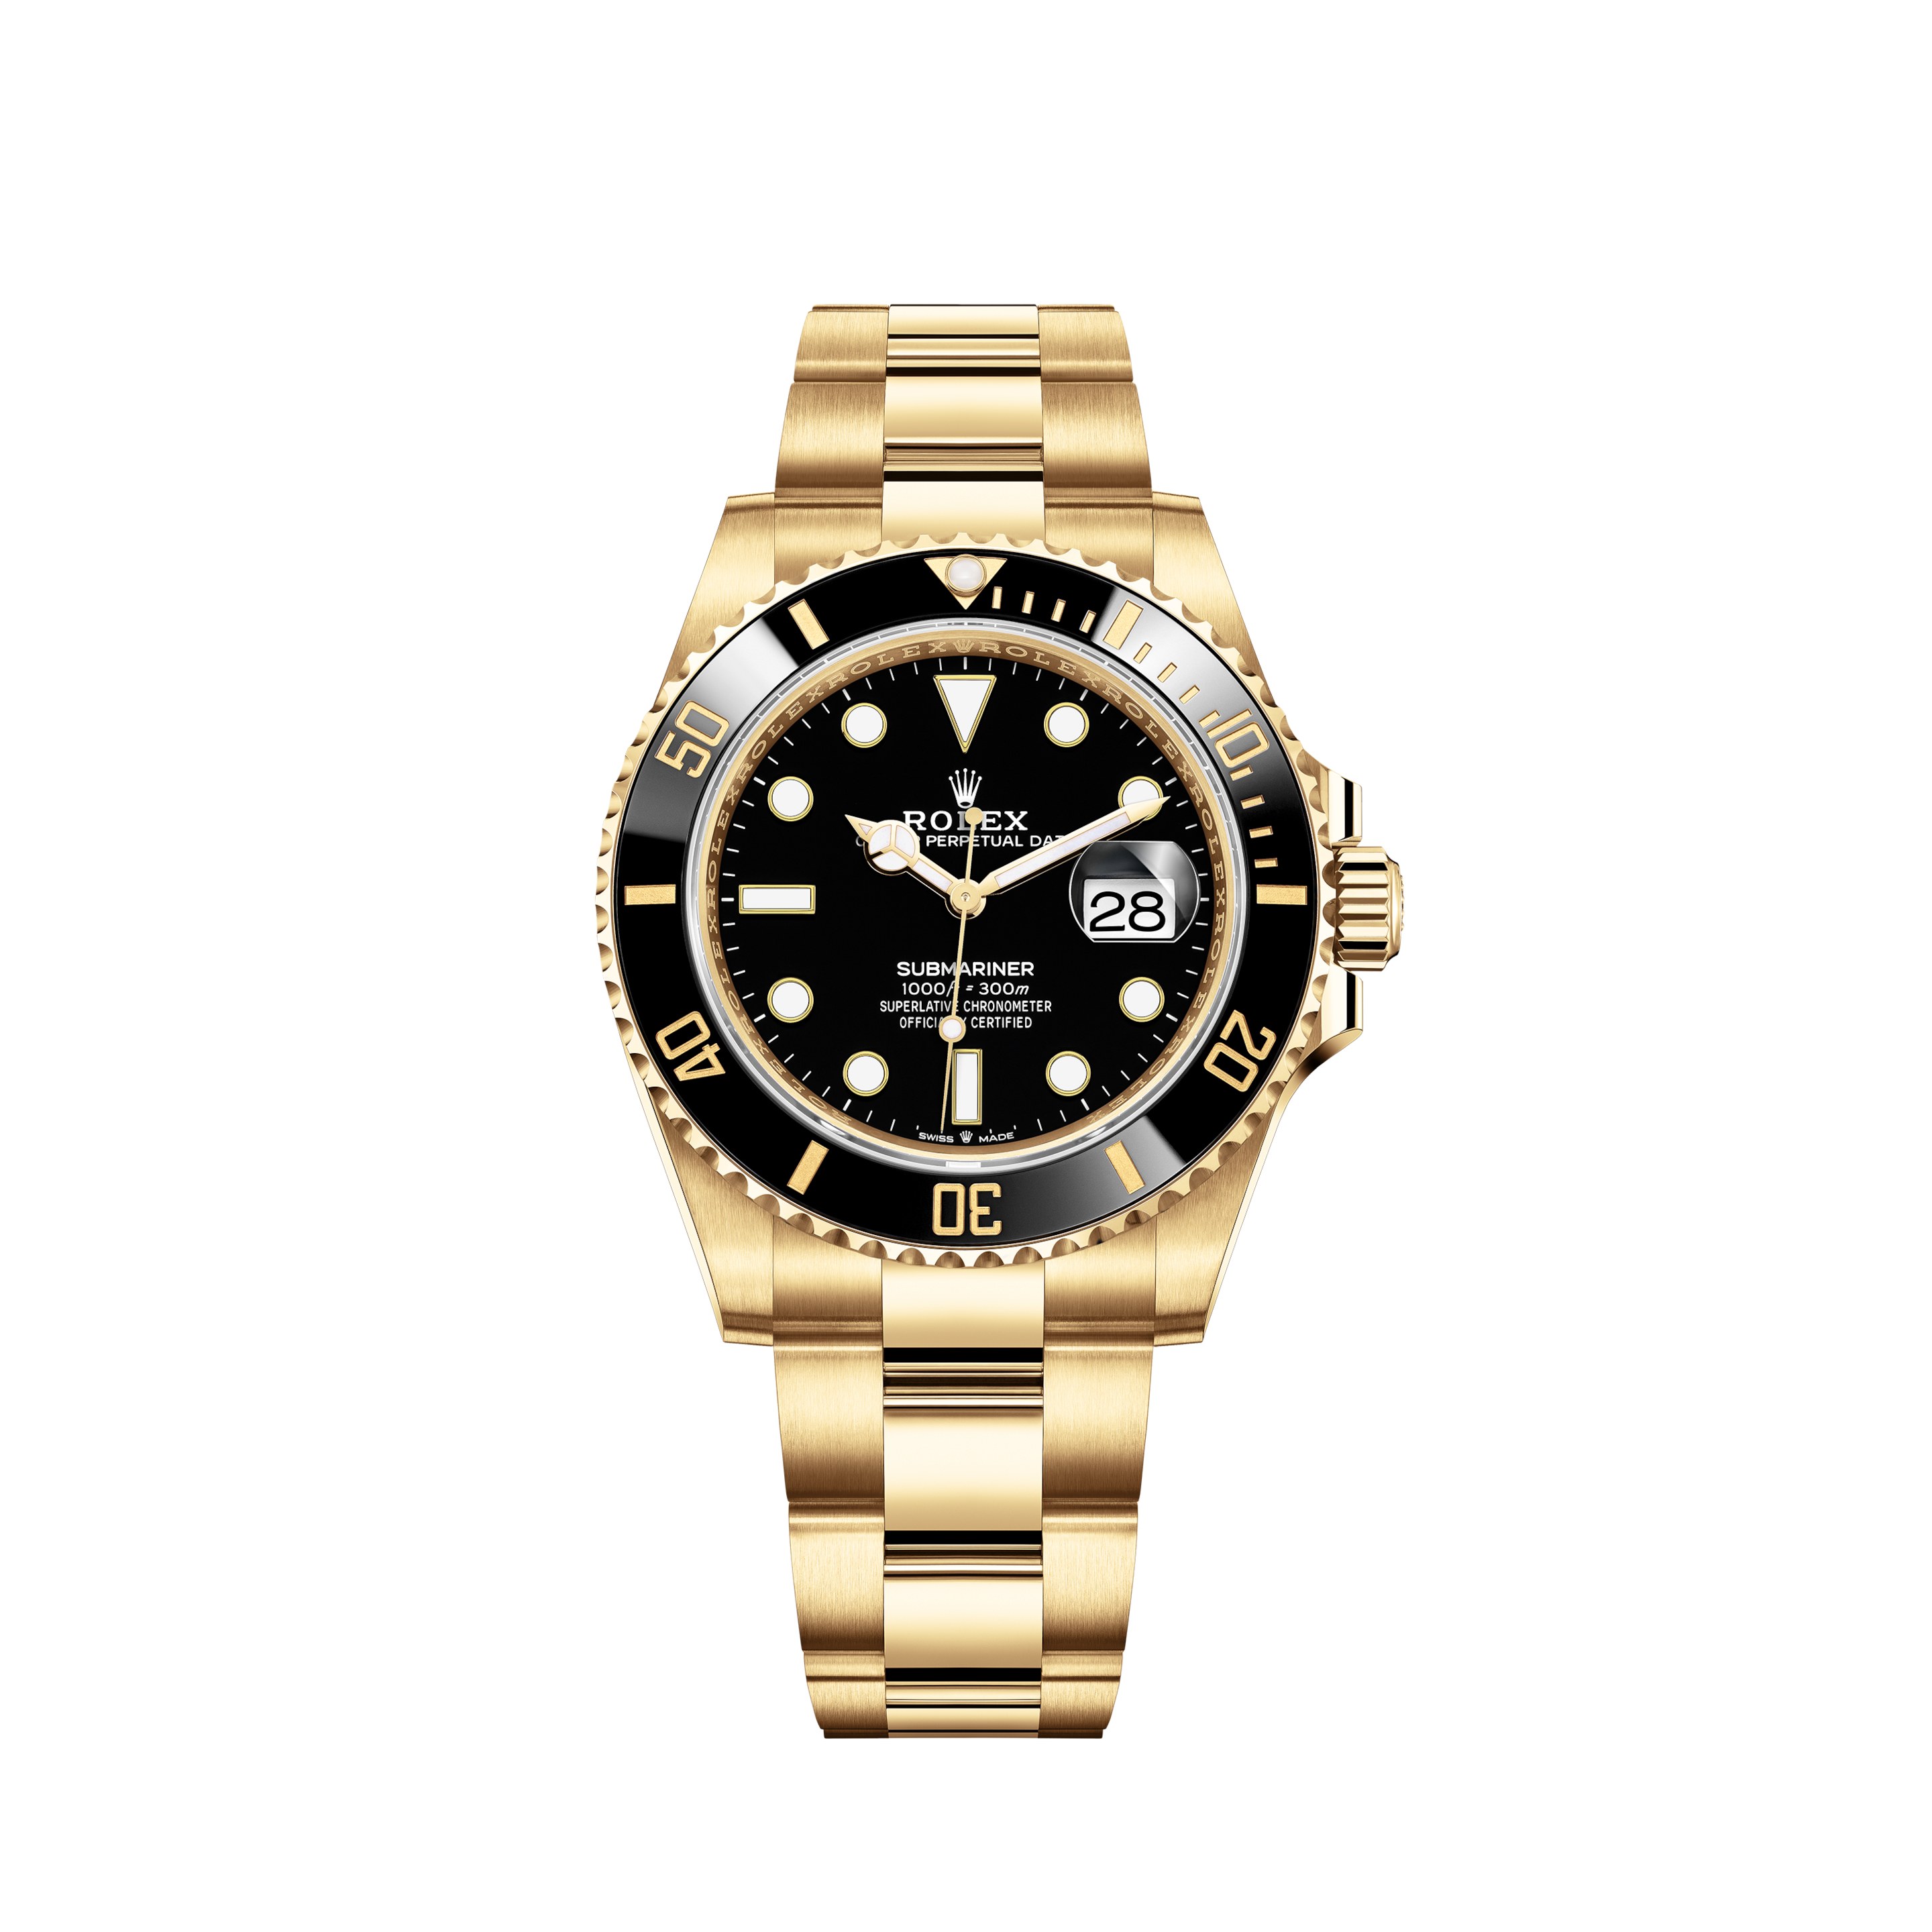 Rolex GMT Master II Automatic Black Dial Stainless Steel Men's Watch - 126710BLNR-0003